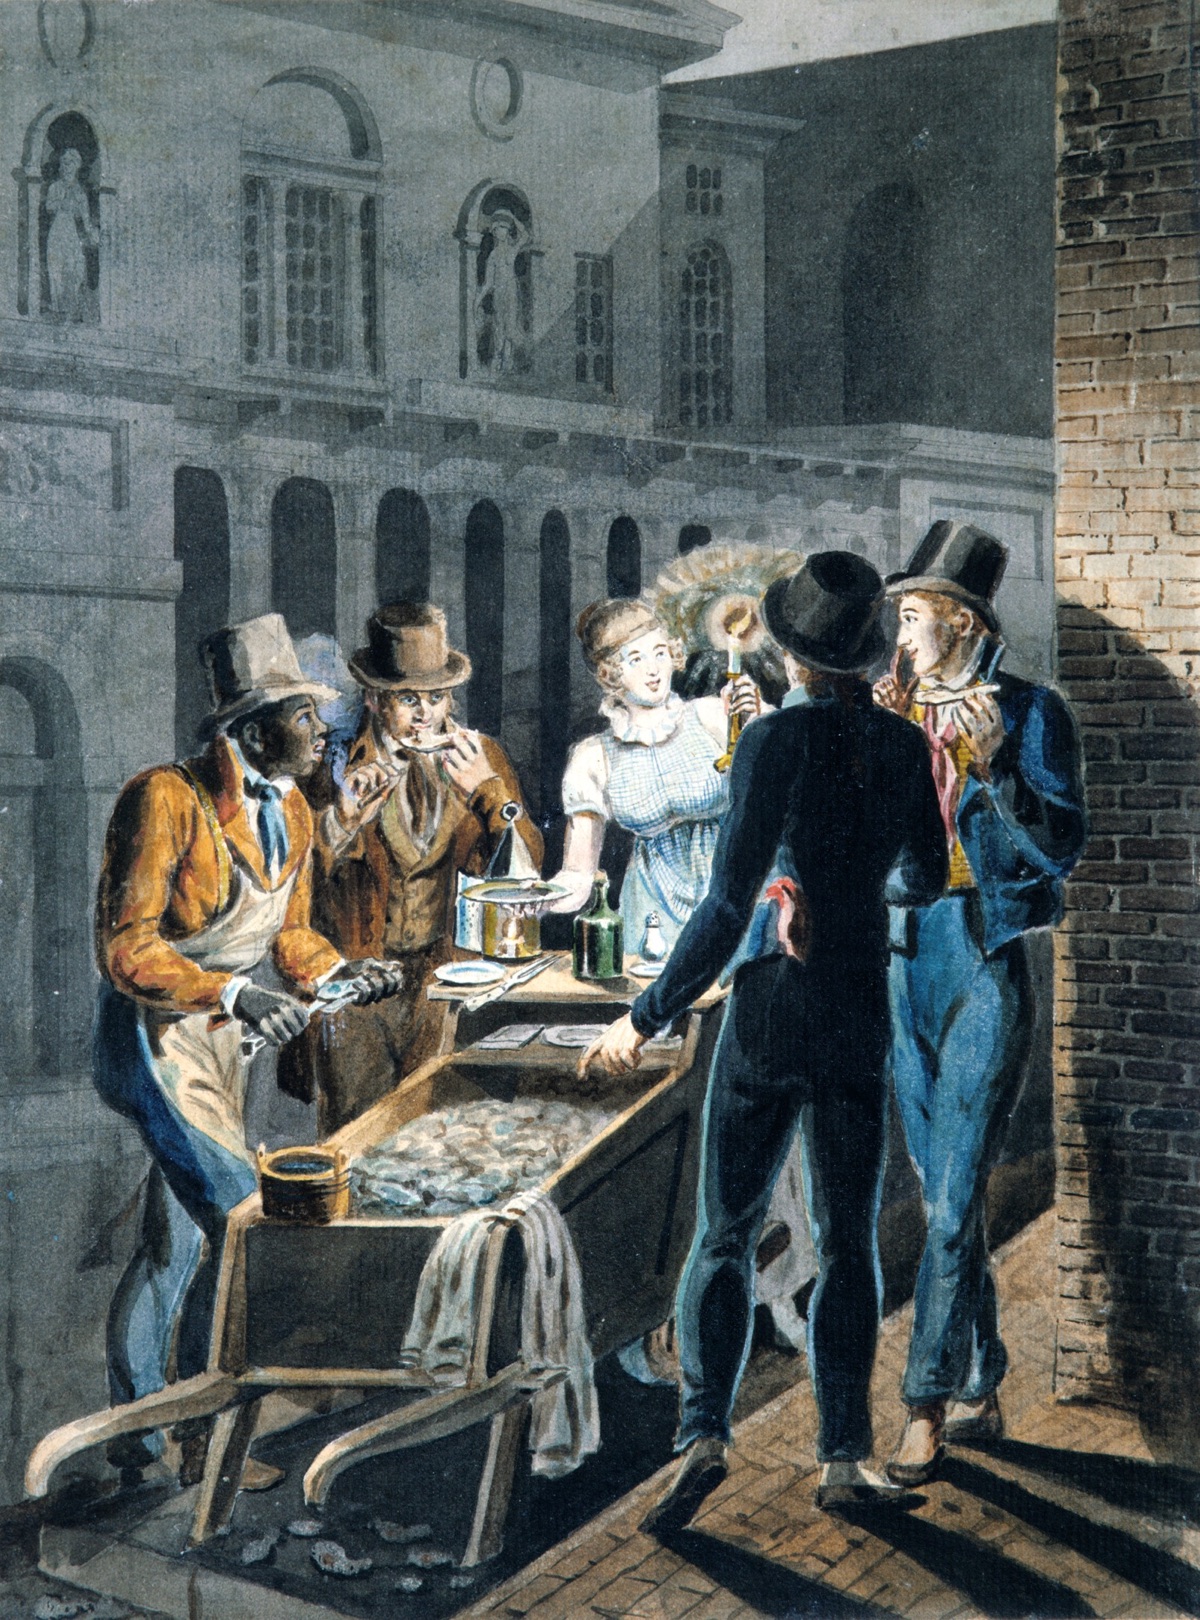 Nightlife_in_Philadelphia—an_Oyster_Barrow_in_front_of_the_Chestnut_Street_Theater_MET_ap42.95.181